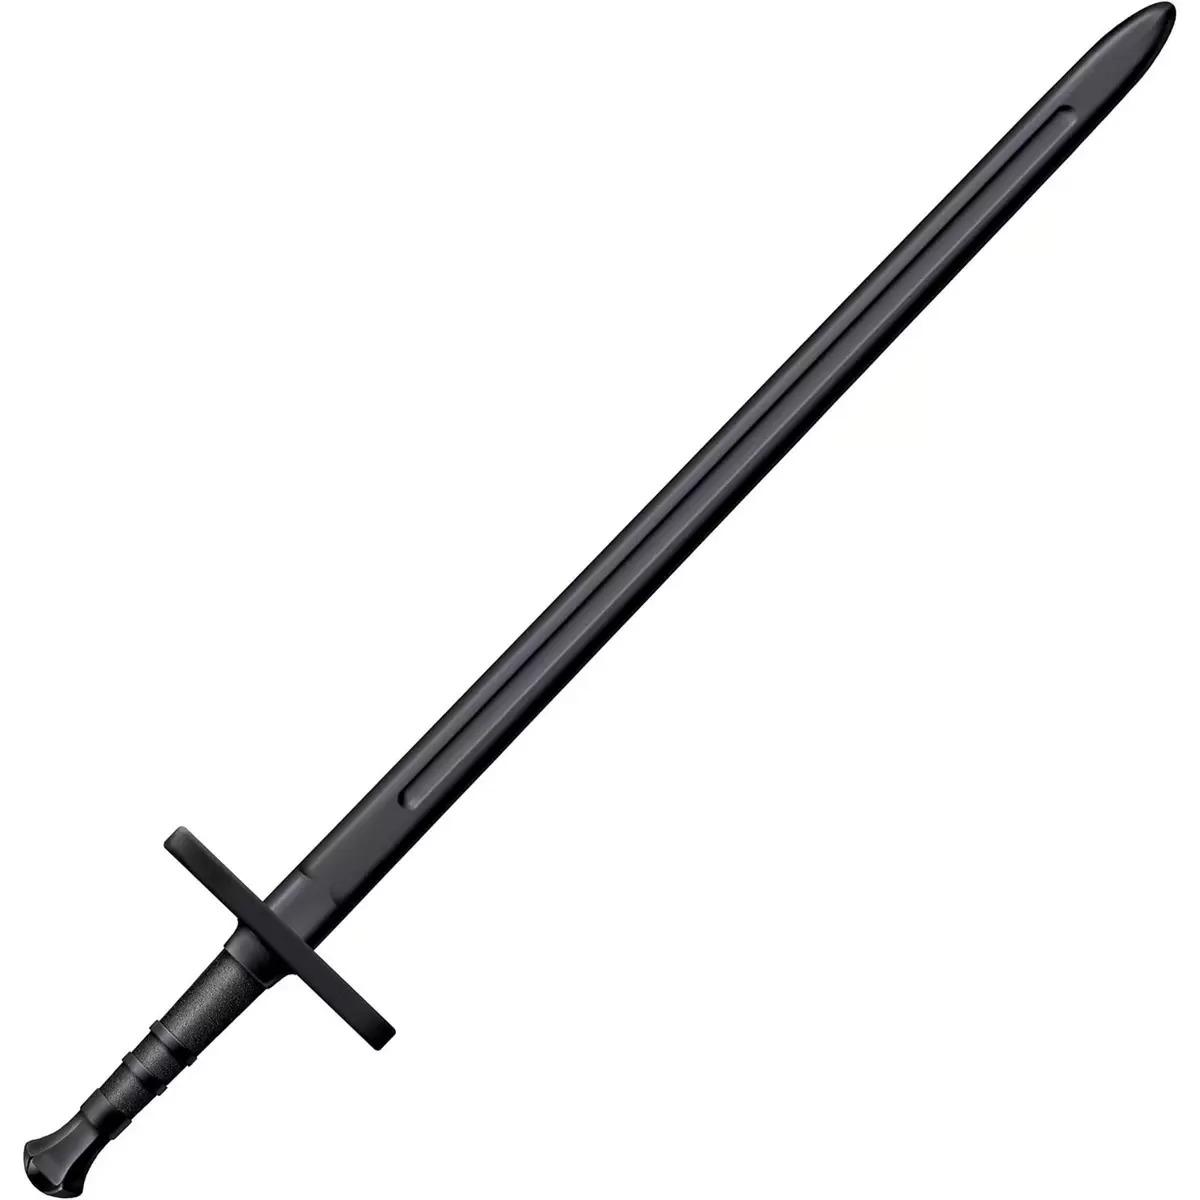 Cold Steel Hand and A Half Polypropylene Training Sword for $23.10